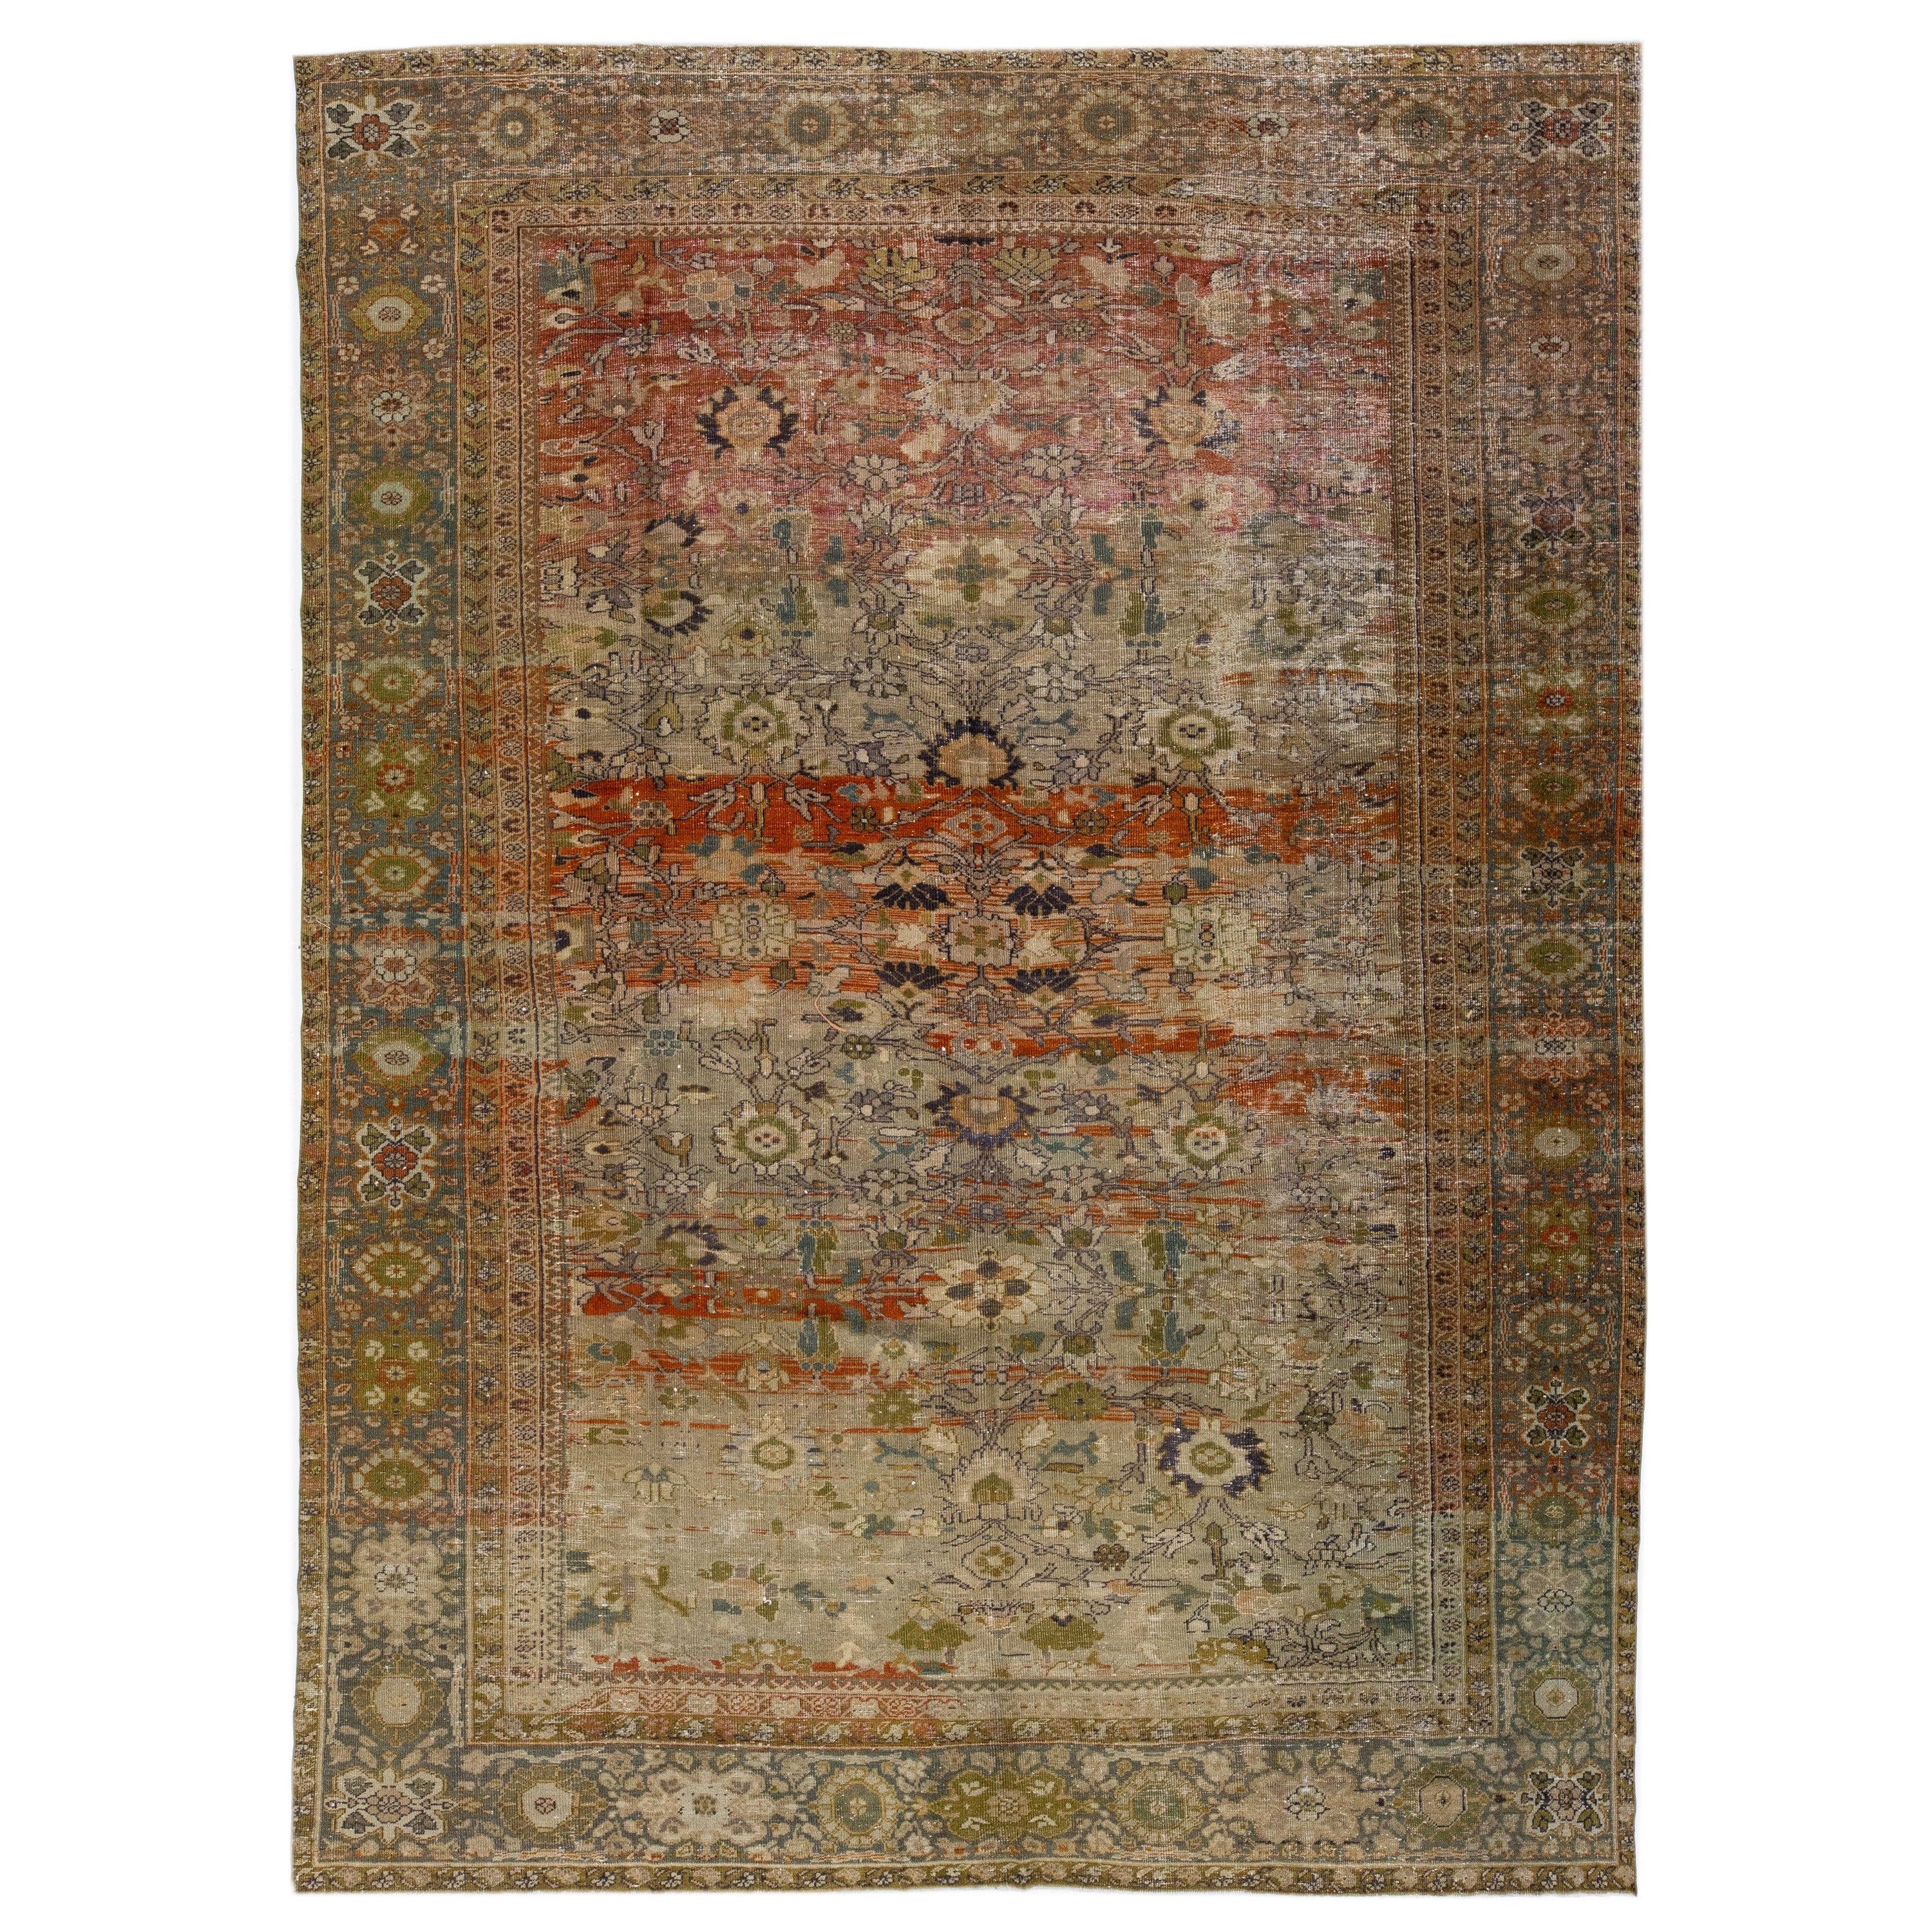 1900s Allover Antique Persian Sultanabad Wool Rug Handmade in Brown